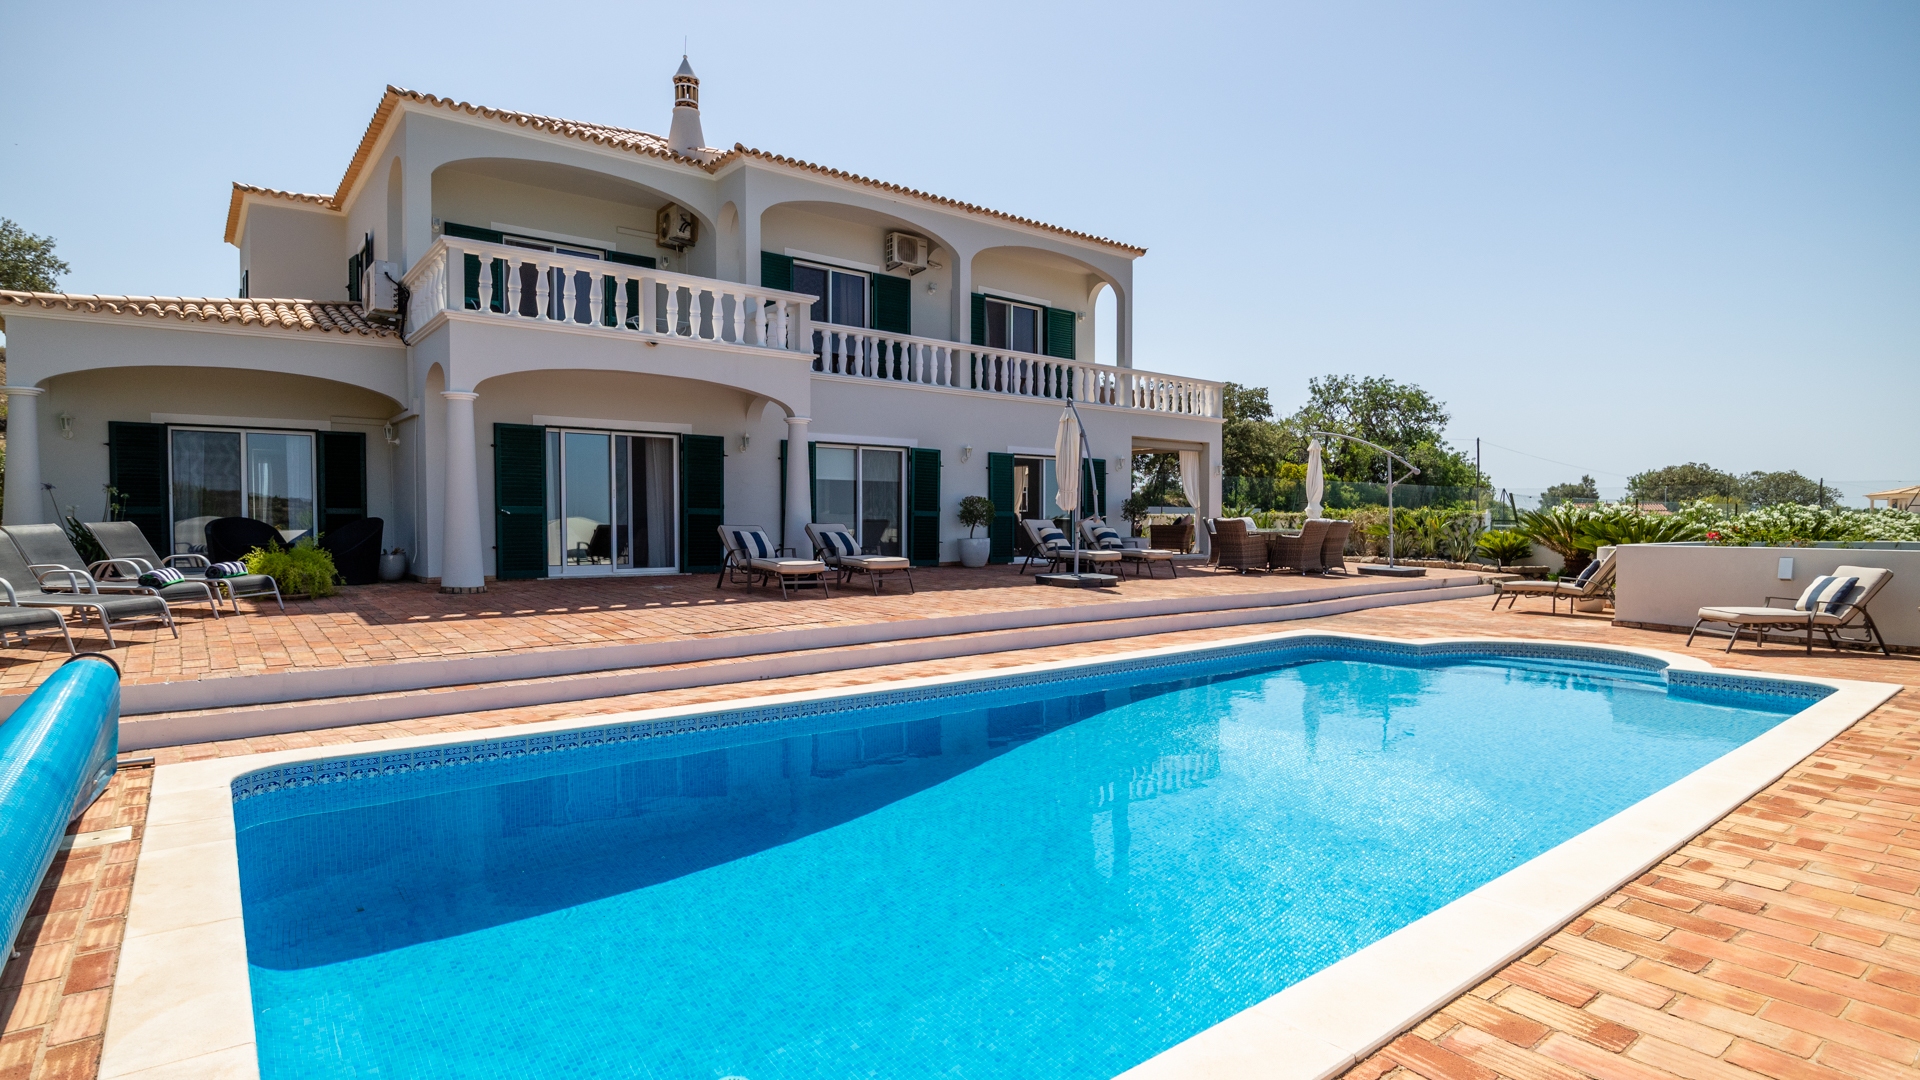 5 Bedroom Villa with Tennis Court & Sea Views on Large Plot near Loulé | VM1820 This spacious villa with south west facing pool, tennis court and sea views would make a perfect holiday rental investment or a holiday home for a large family, near Loulé.